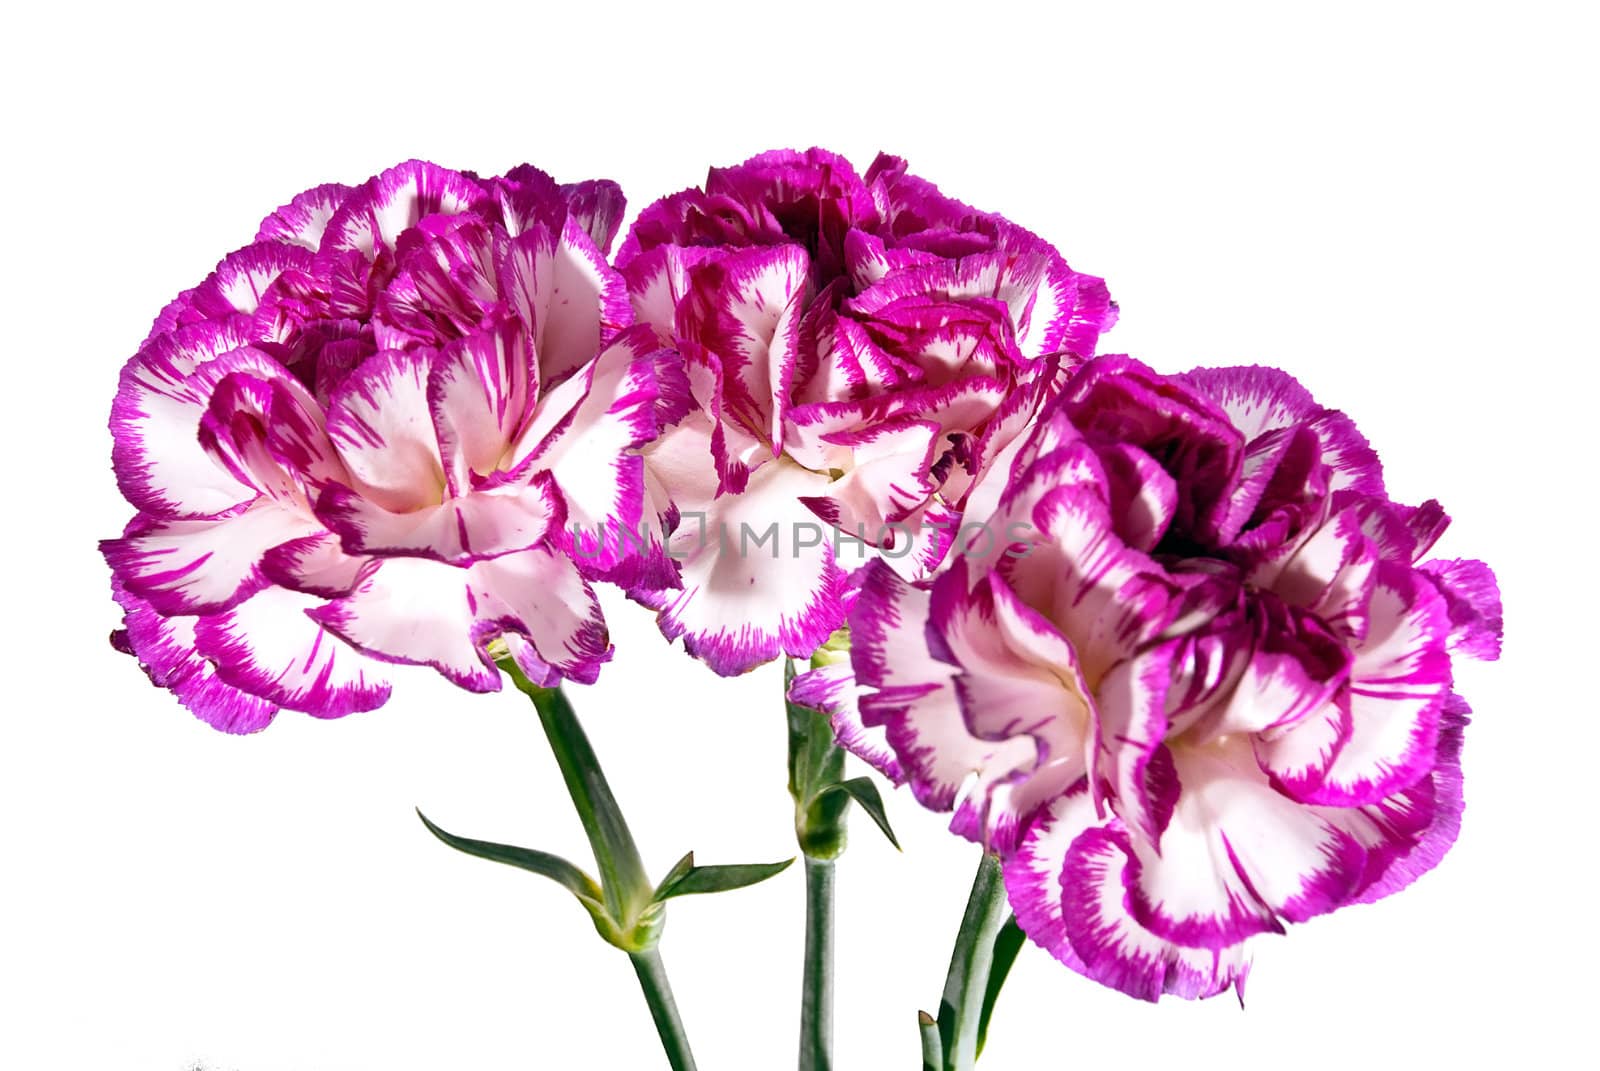 Three violet fresh flowers isolated on a white background.